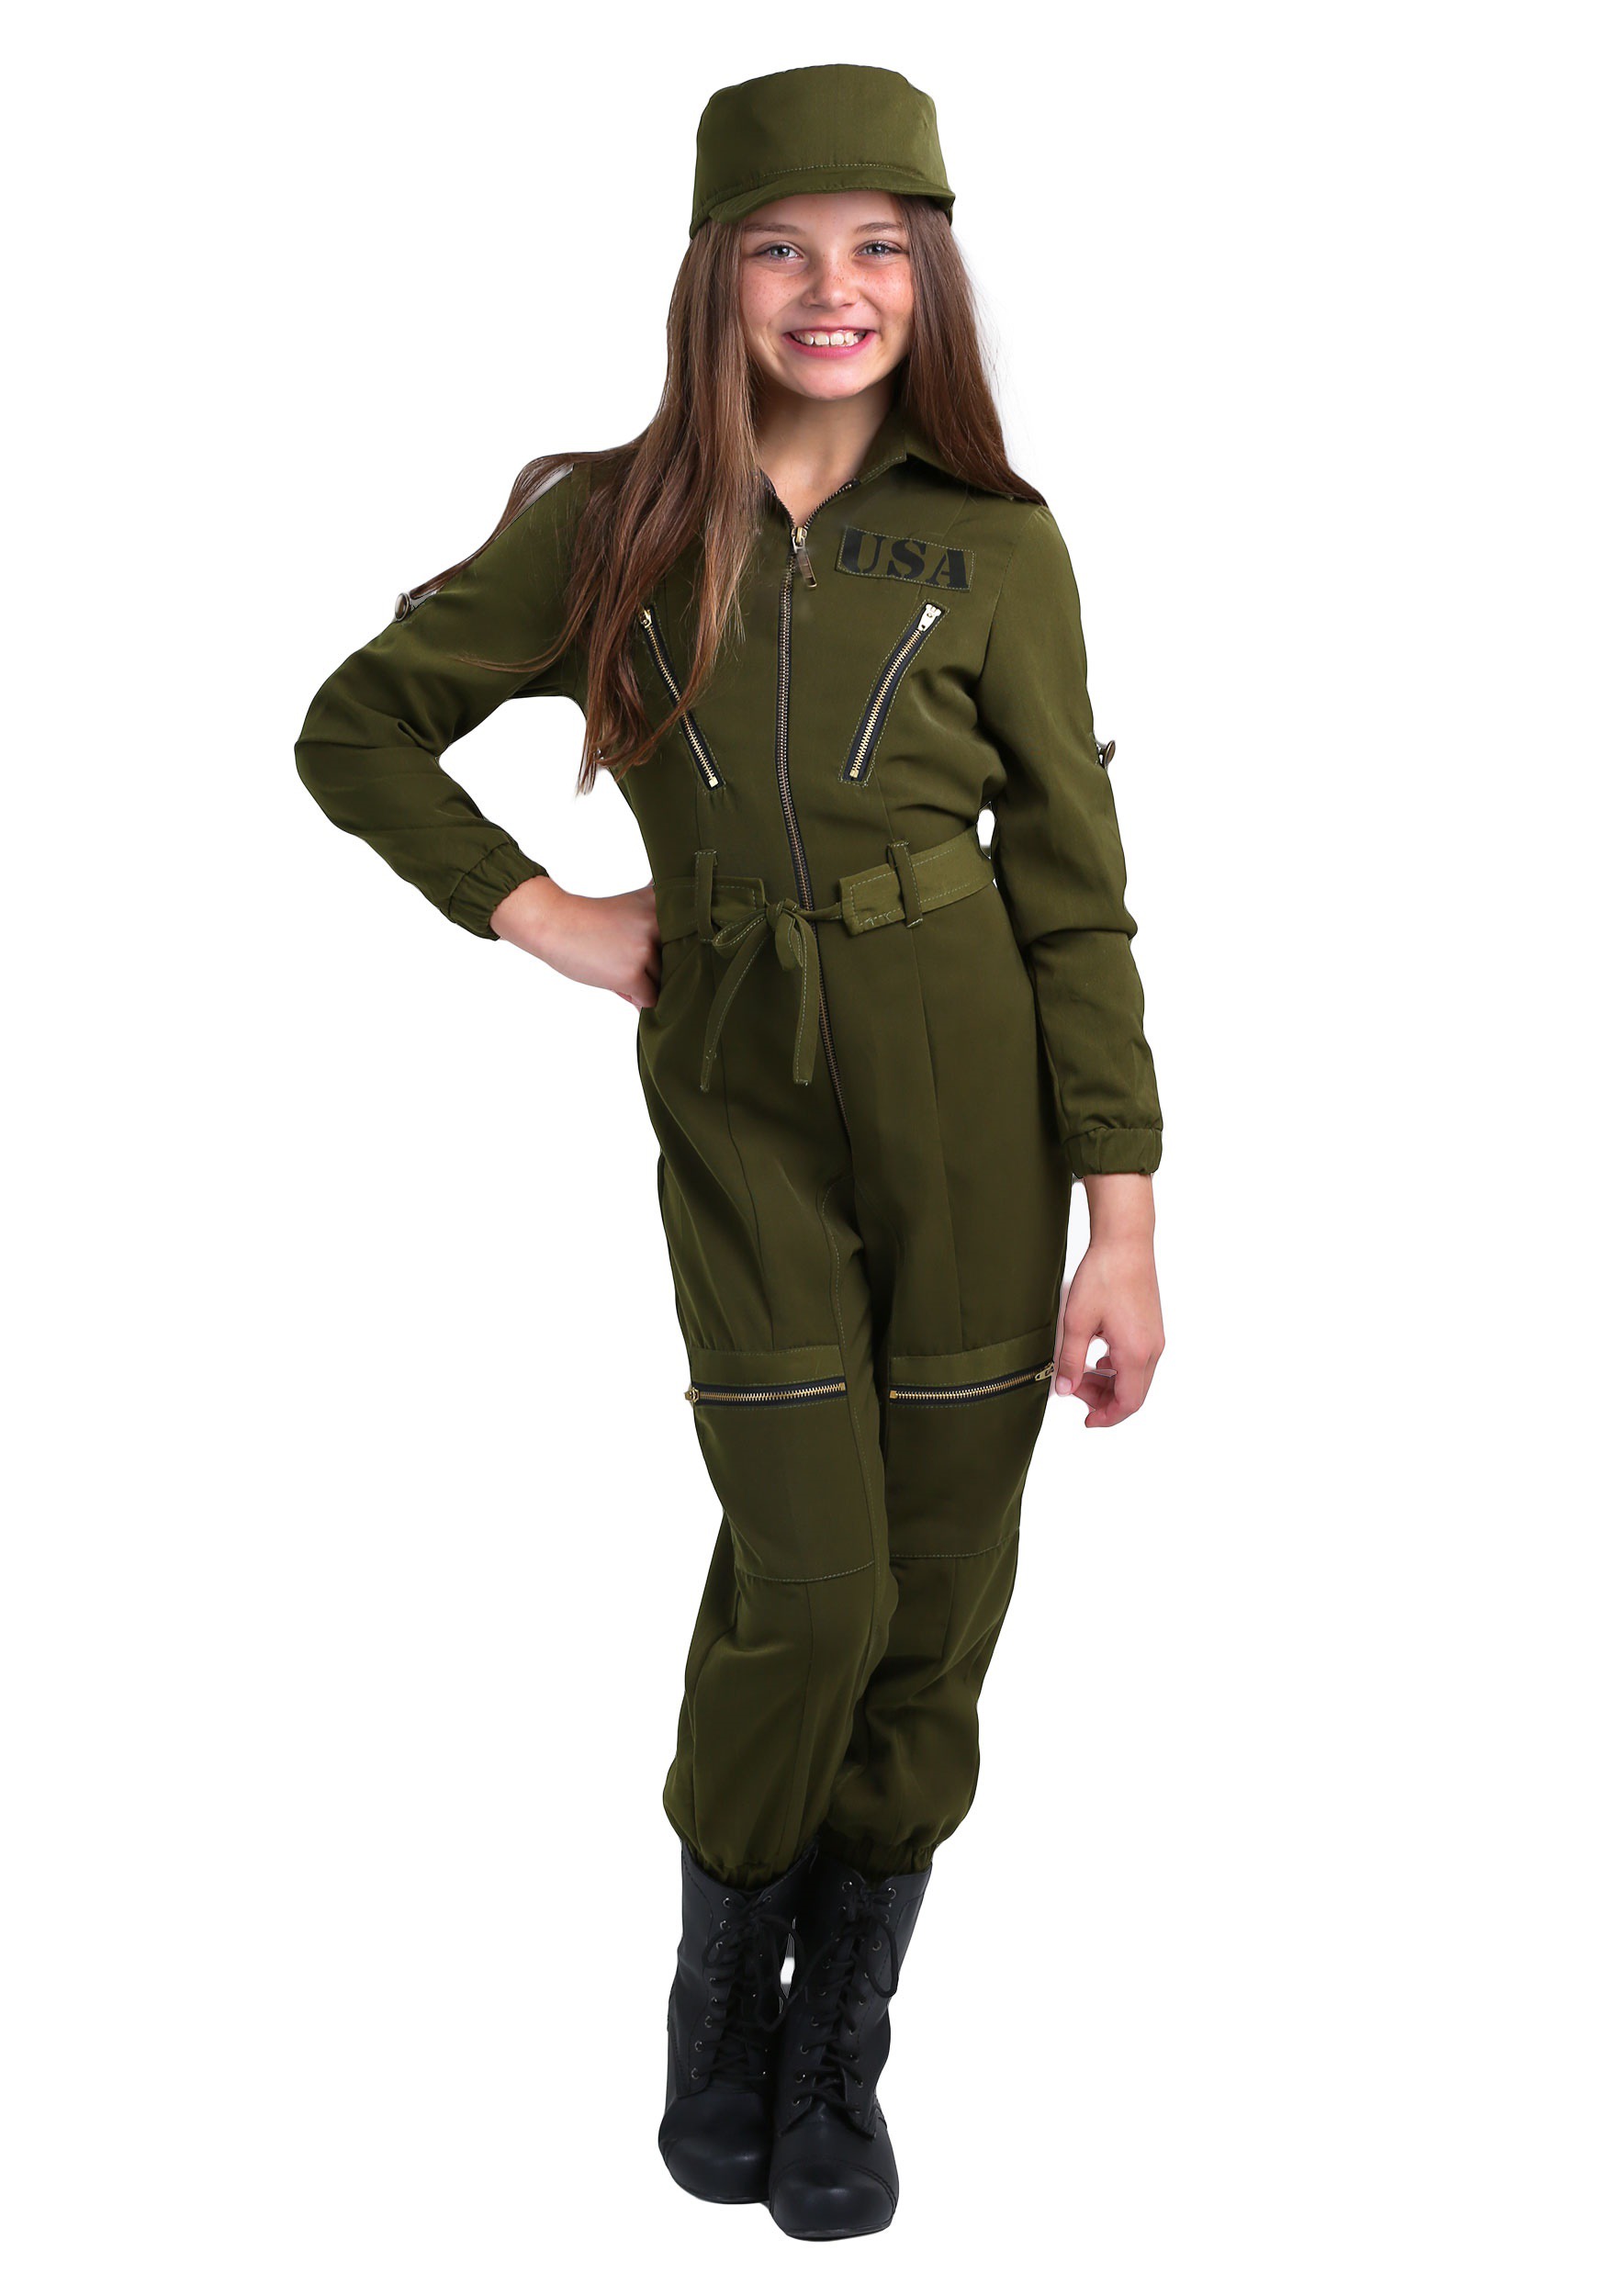 Army Flightsuit Costume For Girls , Uniform Costumes